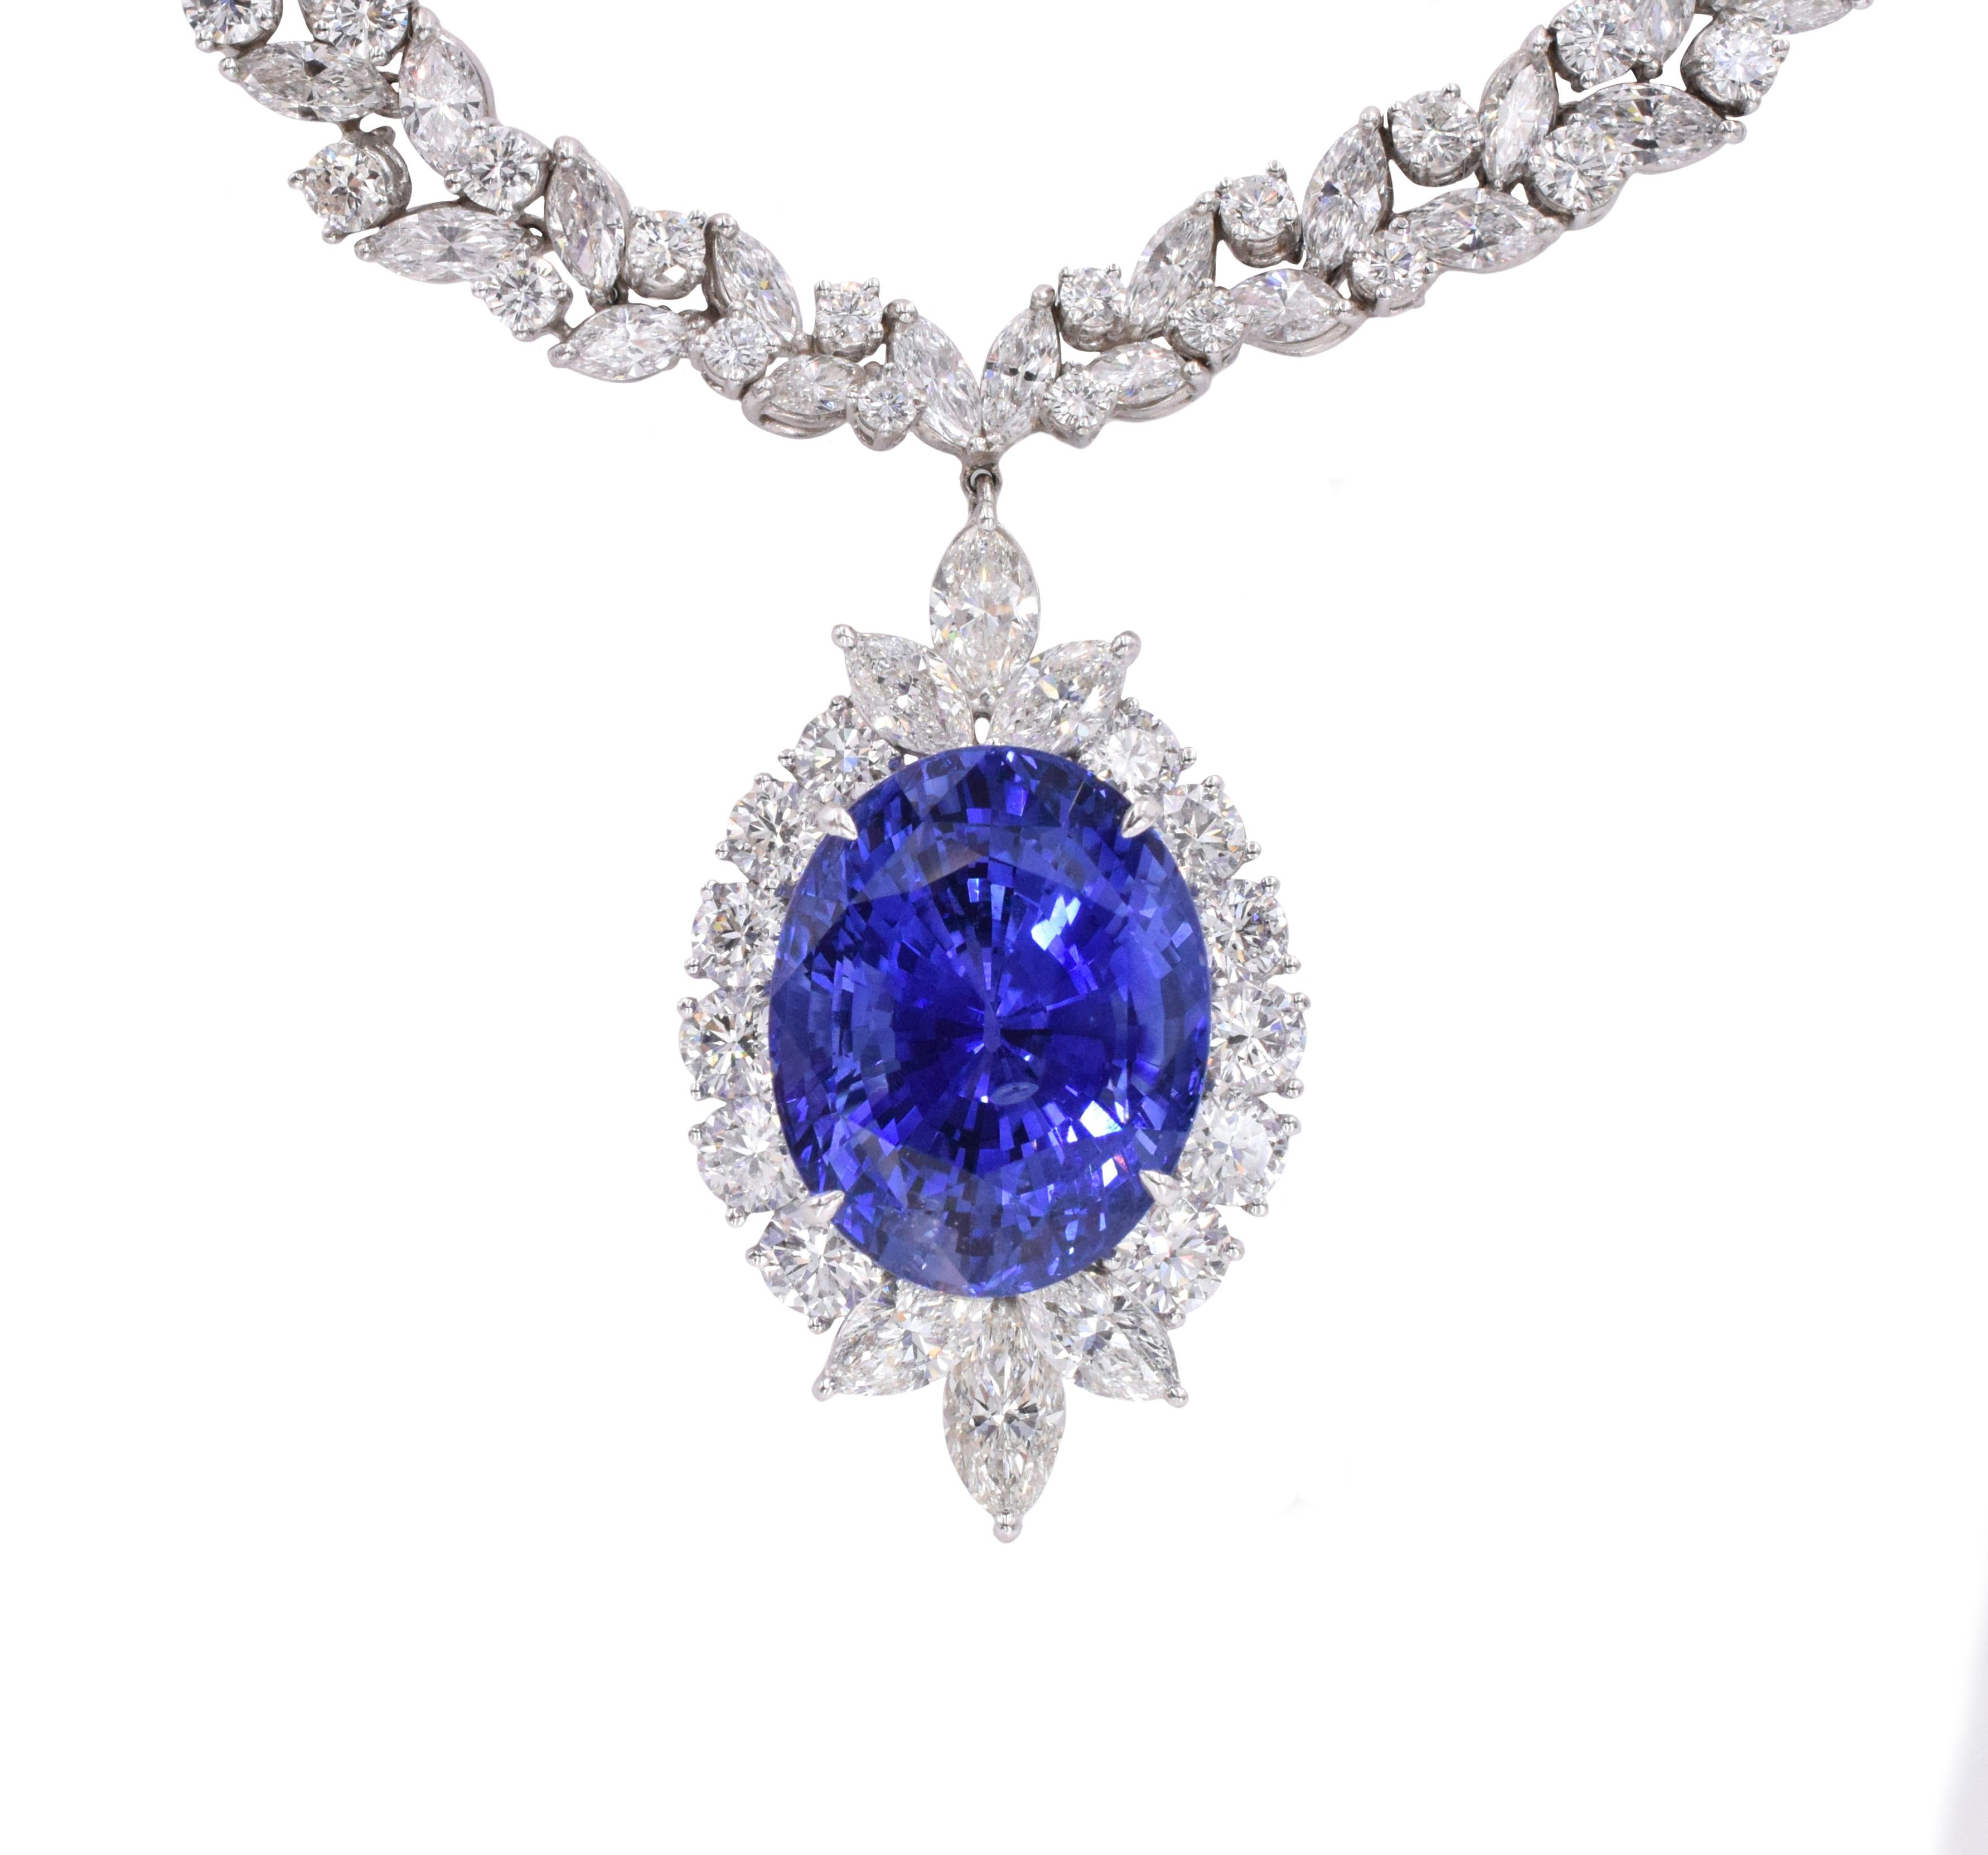 Ceylon Sapphire and Diamond Necklace and Earrings. This set of necklace has marquise, pear shaped, and round diamonds weighing approximately 36ct and a Oval shape sapphire of 50.14 carats, all set in platinum, The earrings have round diamonds